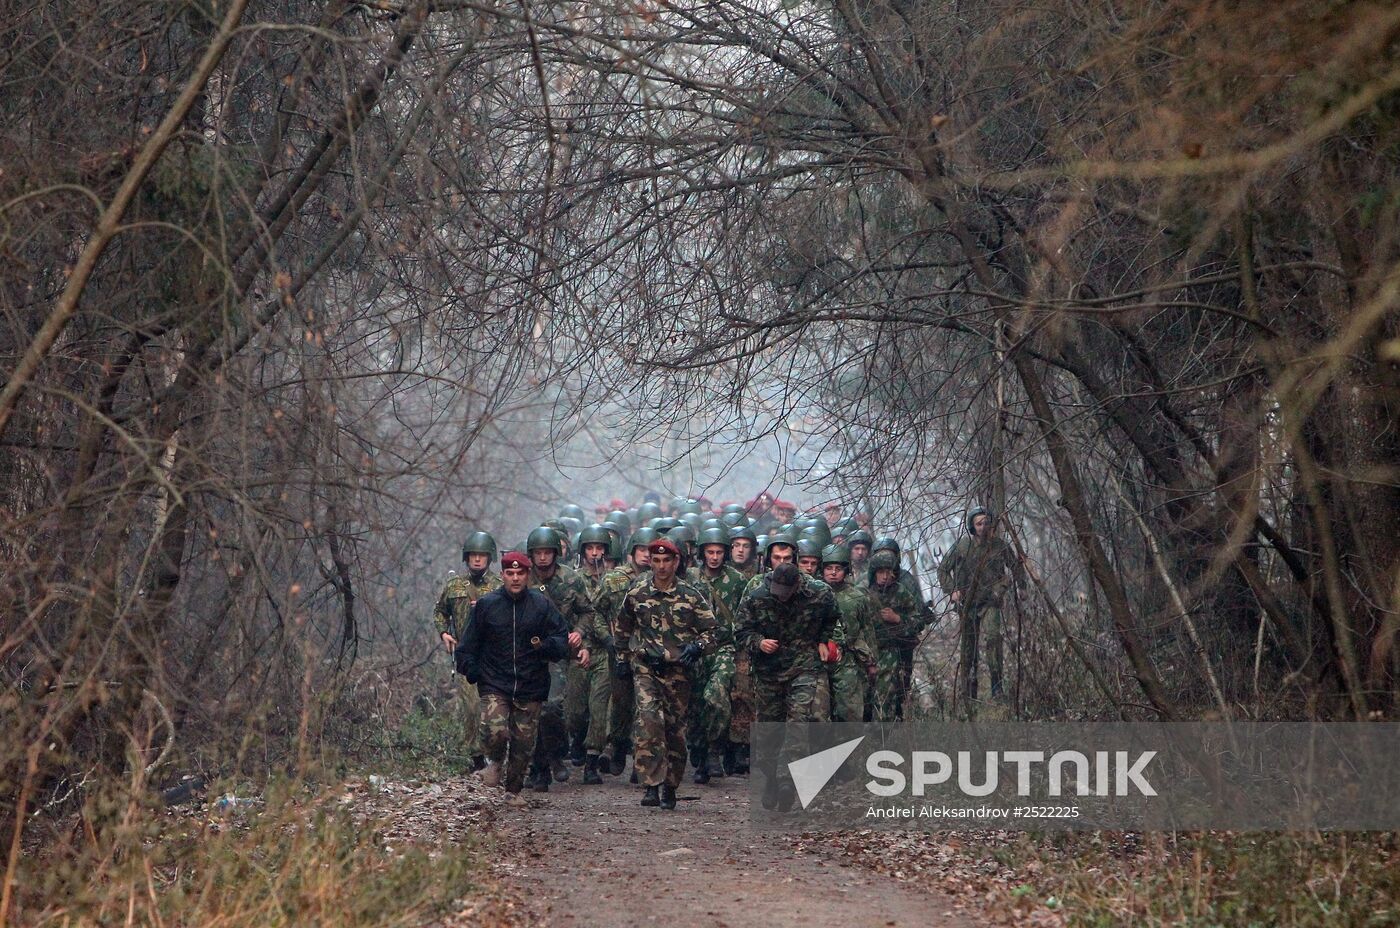 Belarus special forces soldiers take maroon beret test